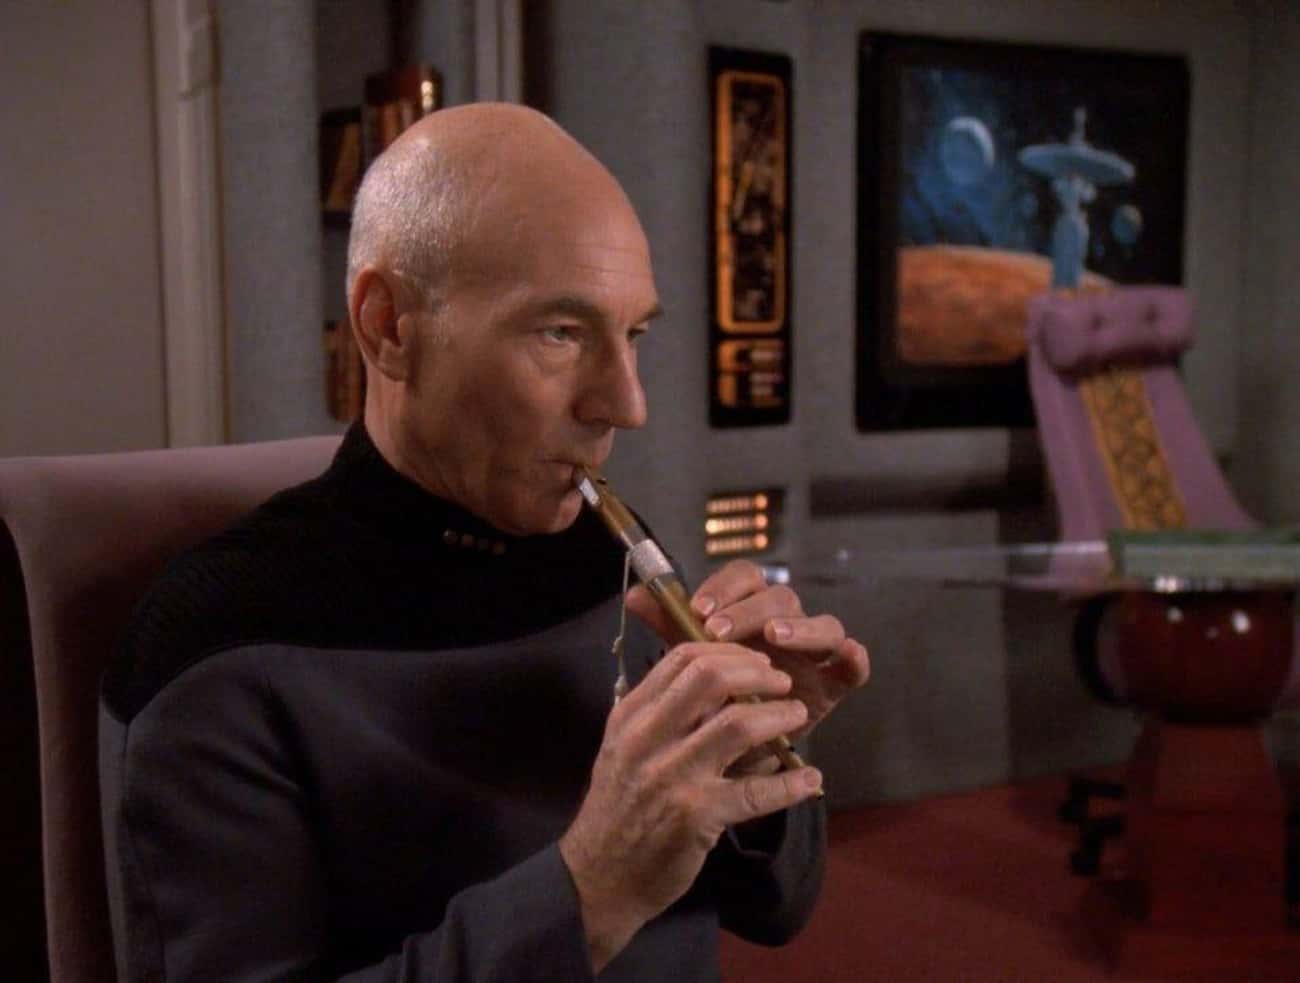 The Ressikan Flute From ‘Star Trek: The Next Generation’